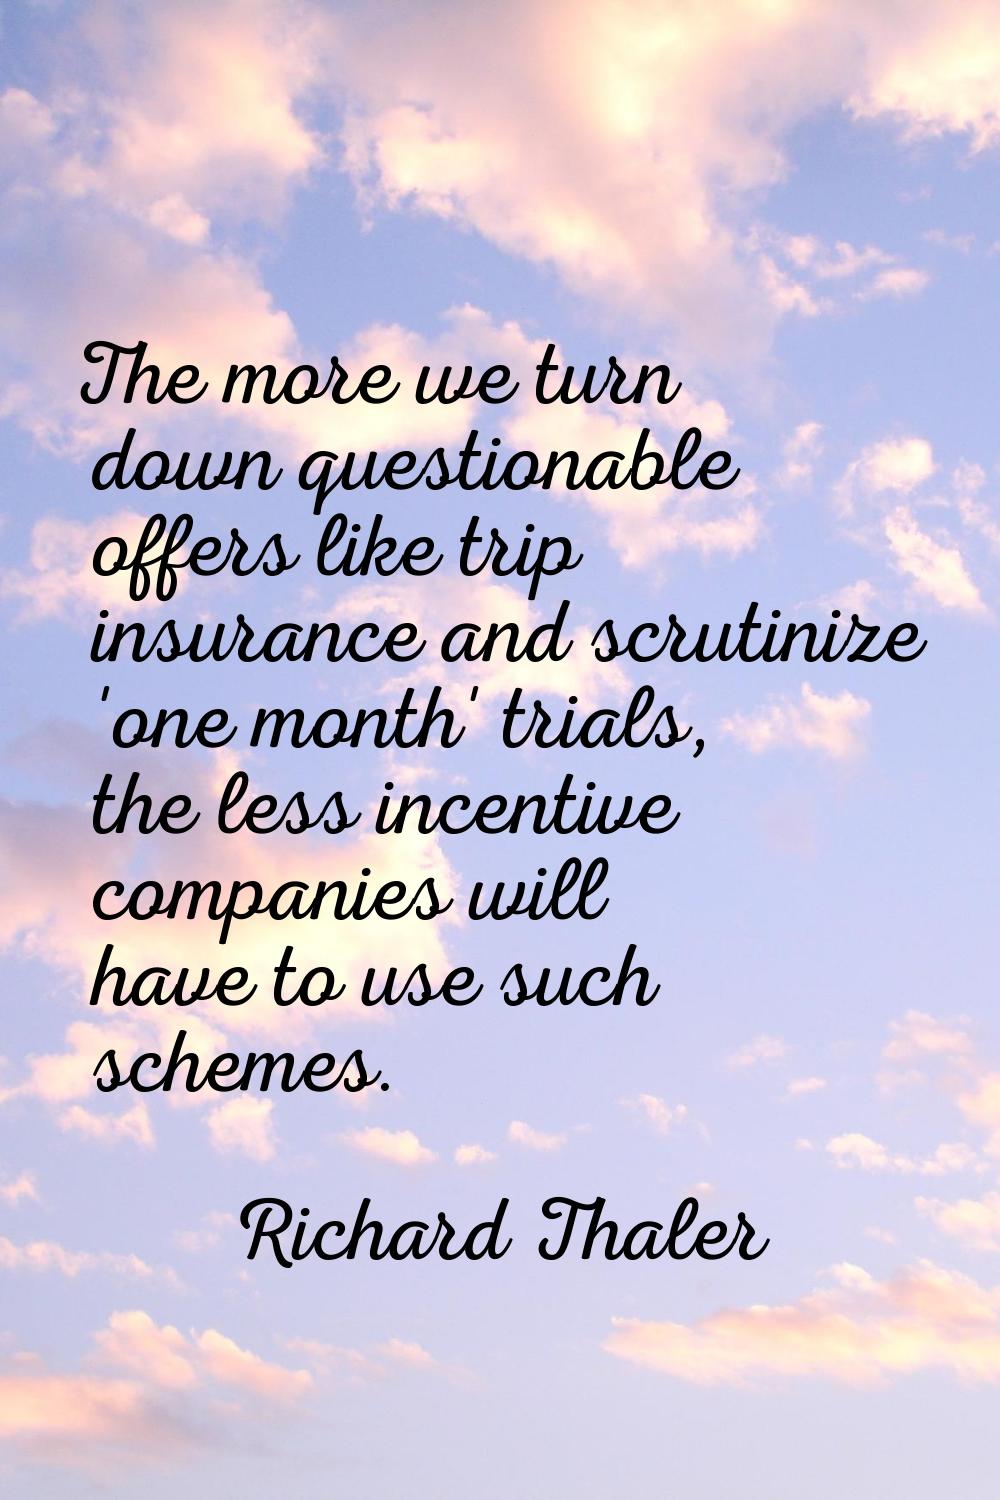 The more we turn down questionable offers like trip insurance and scrutinize 'one month' trials, th